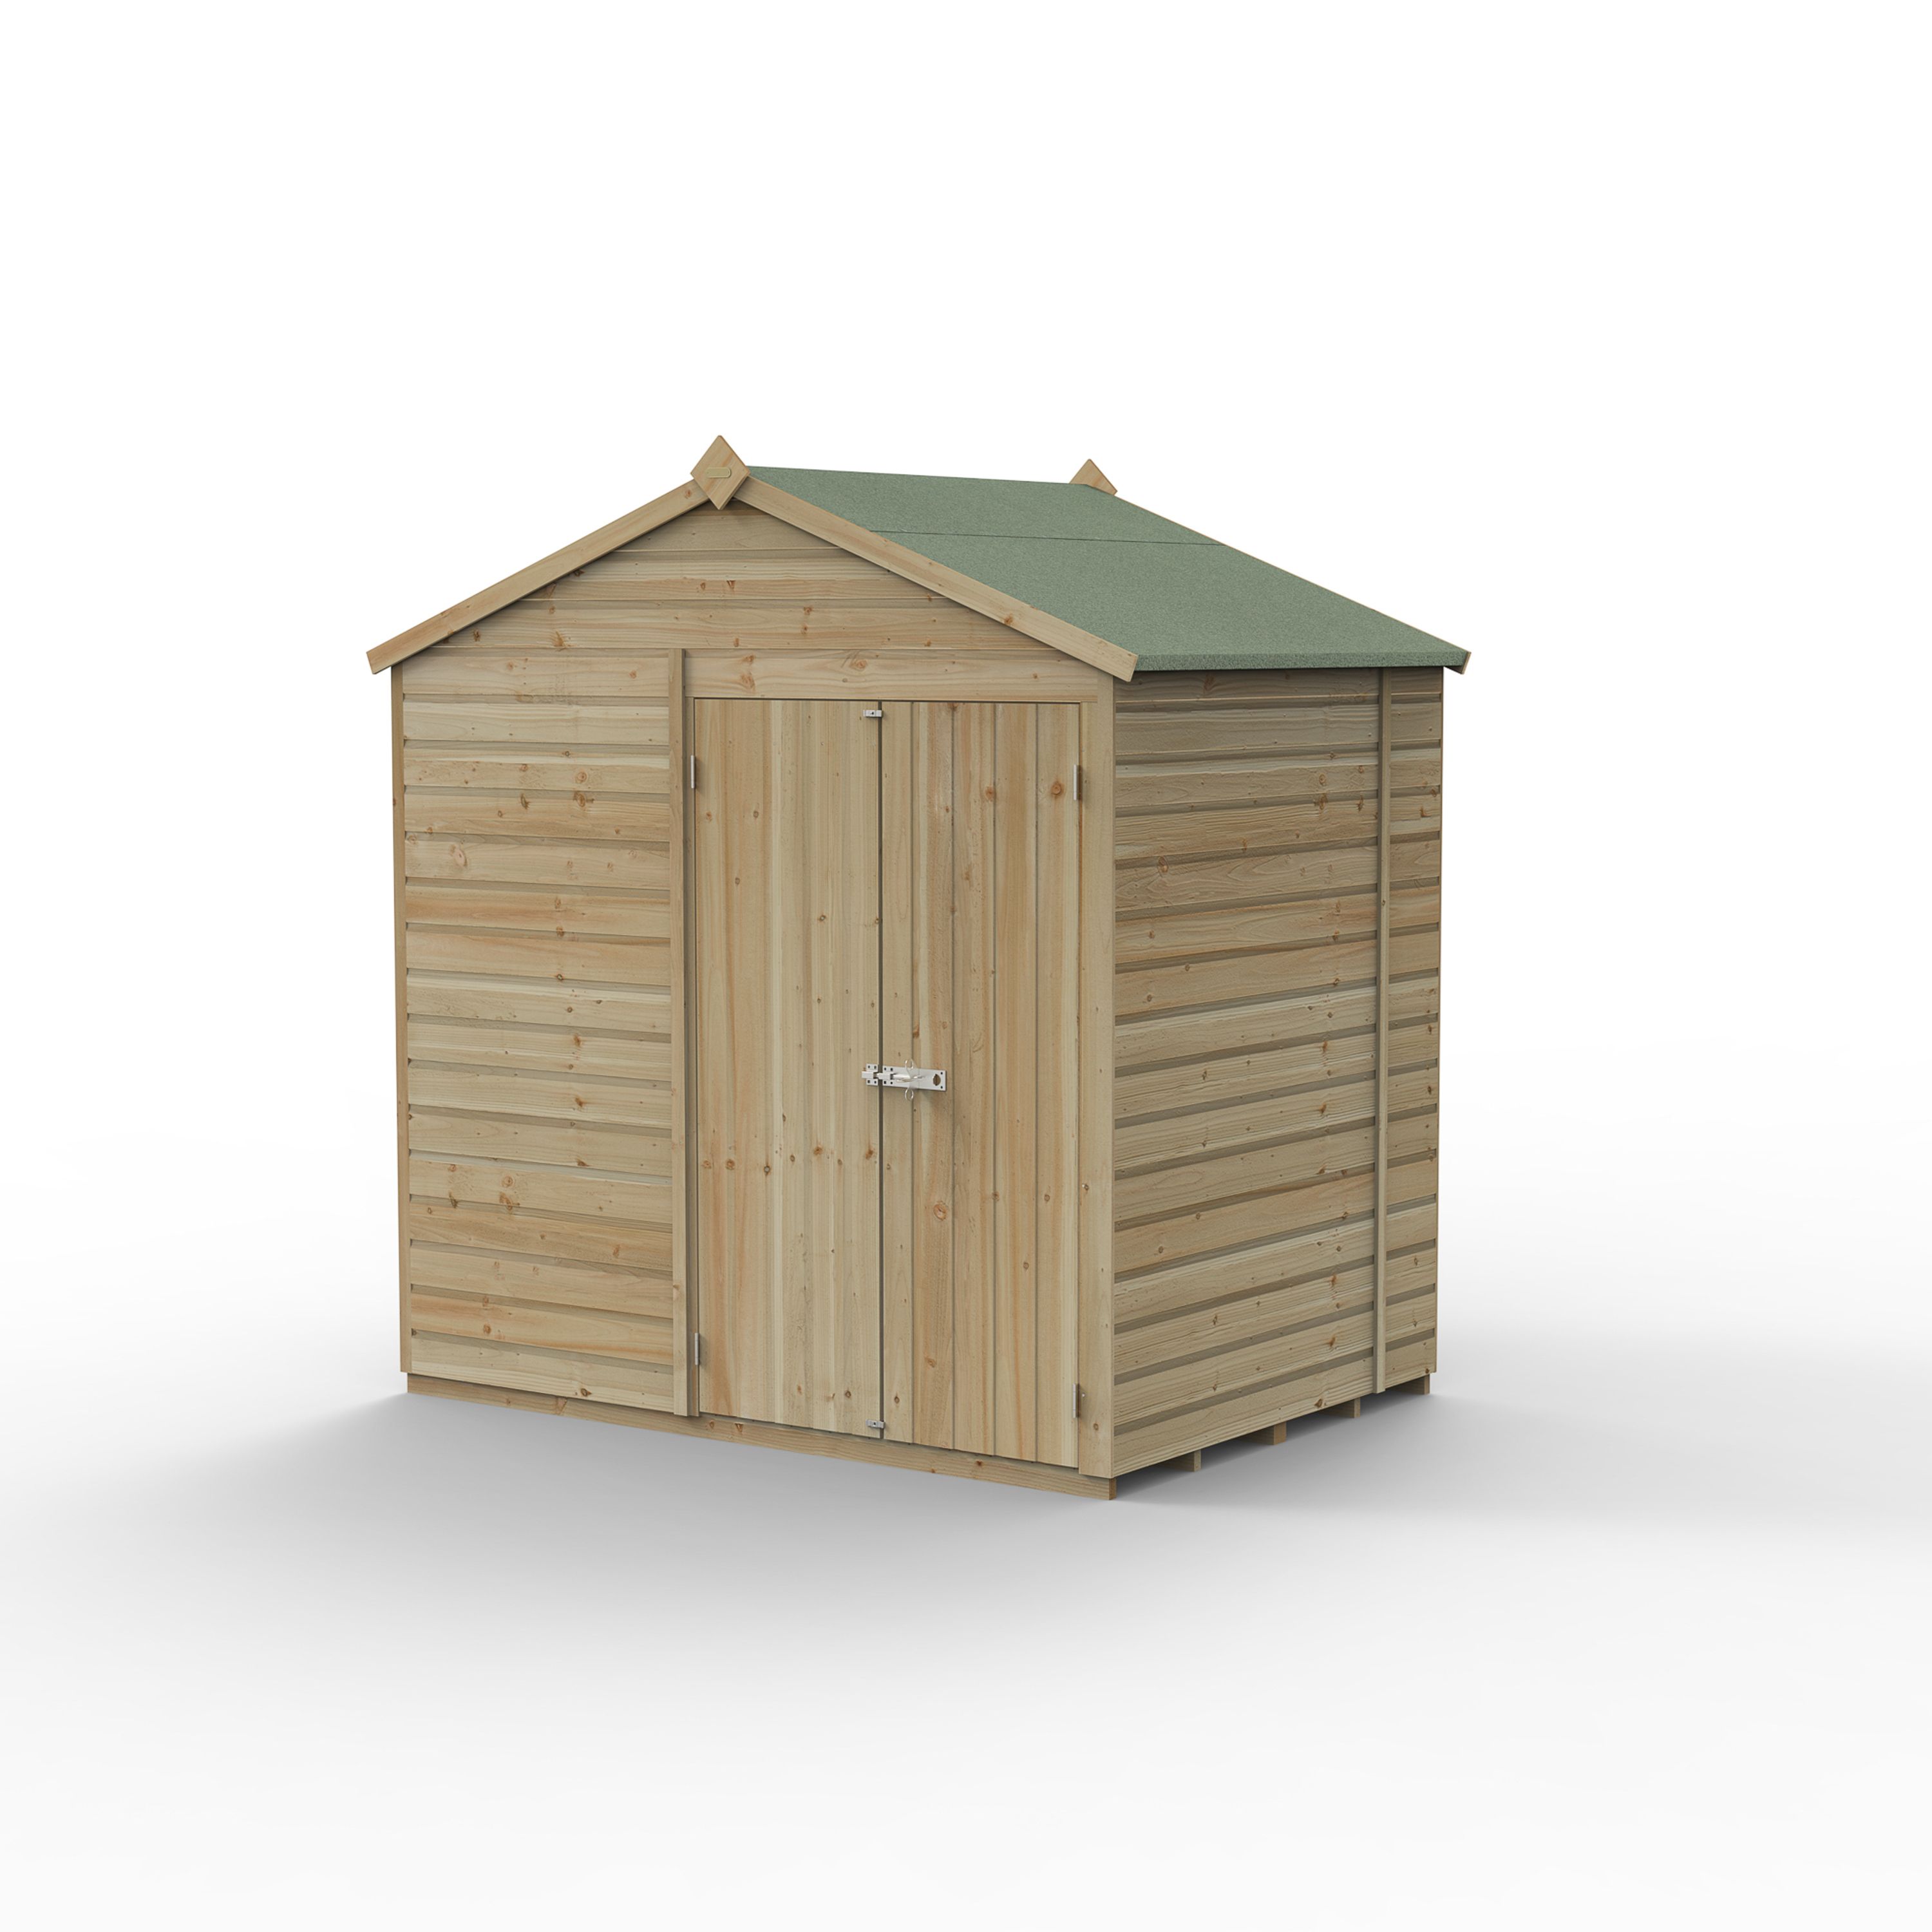 Forest Garden Beckwood 7x5 ft Apex Natural timber Wooden 2 door Shed with floor - Assembly not required